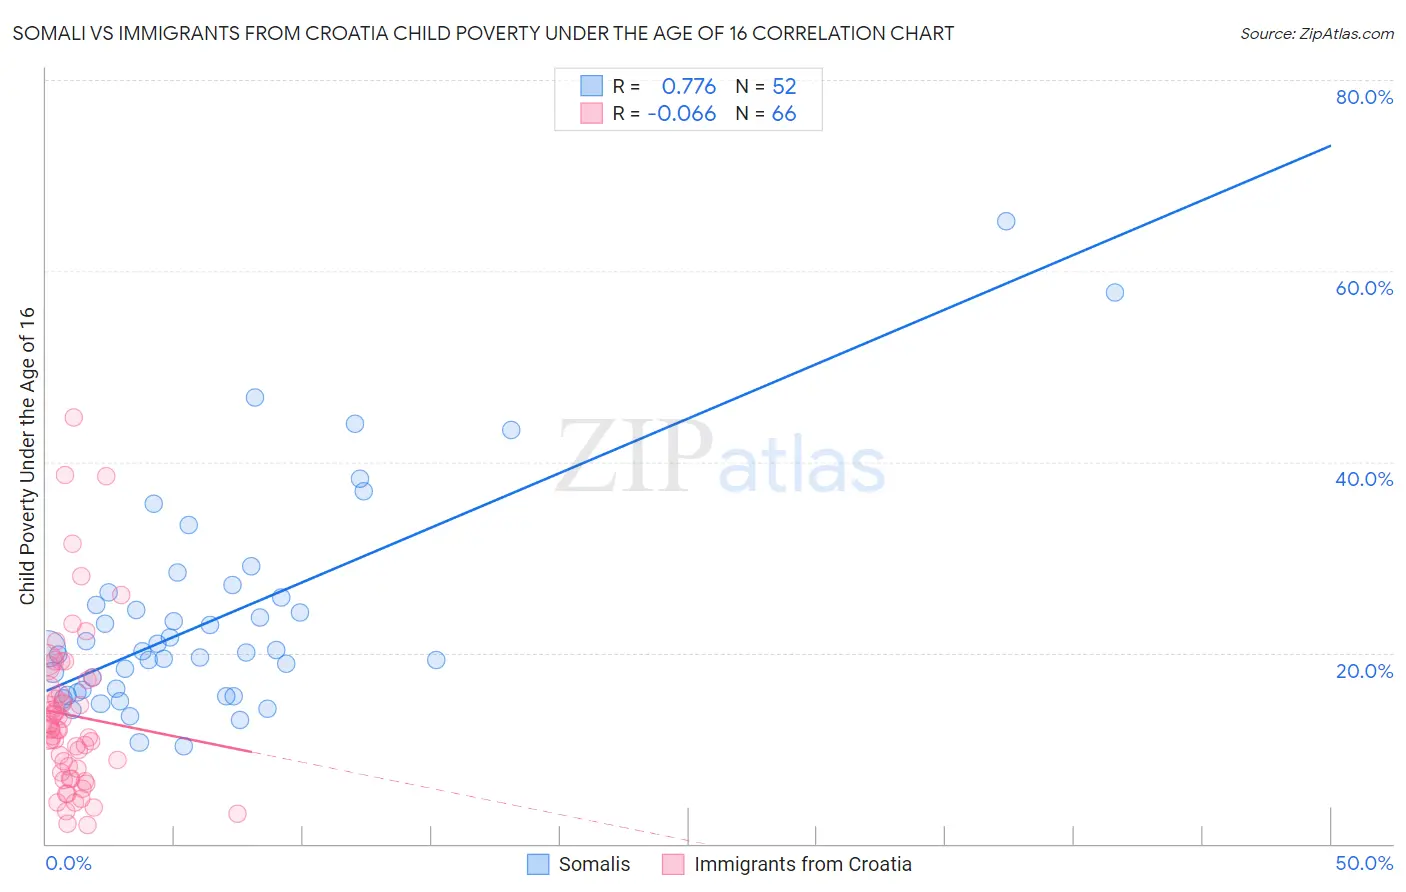 Somali vs Immigrants from Croatia Child Poverty Under the Age of 16